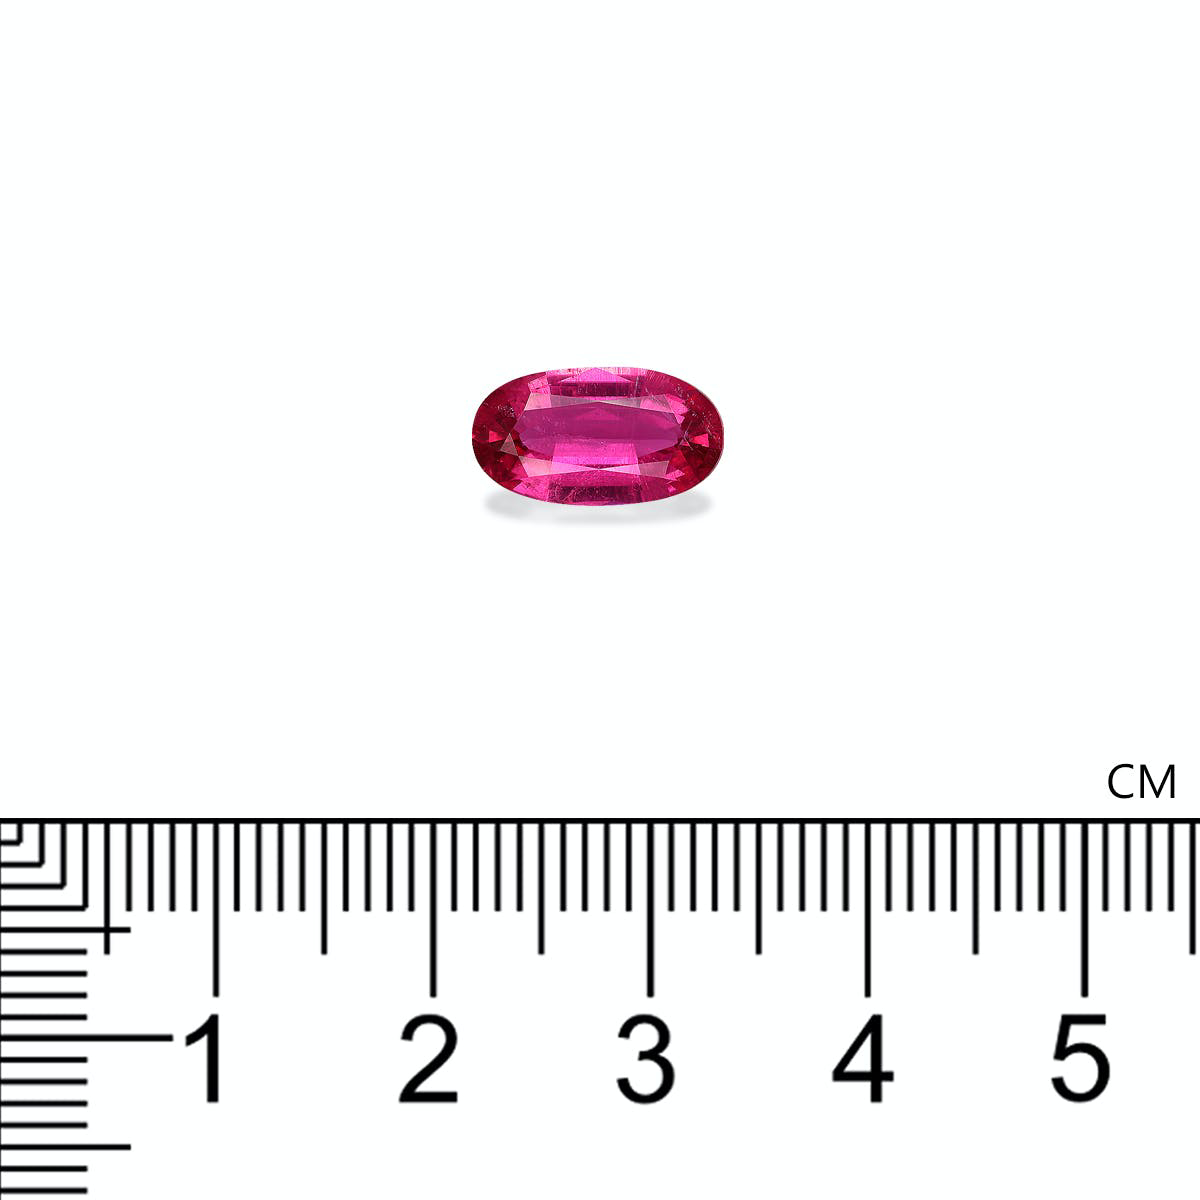 Picture of Pink Rubellite Tourmaline 2.05ct (RL1167)